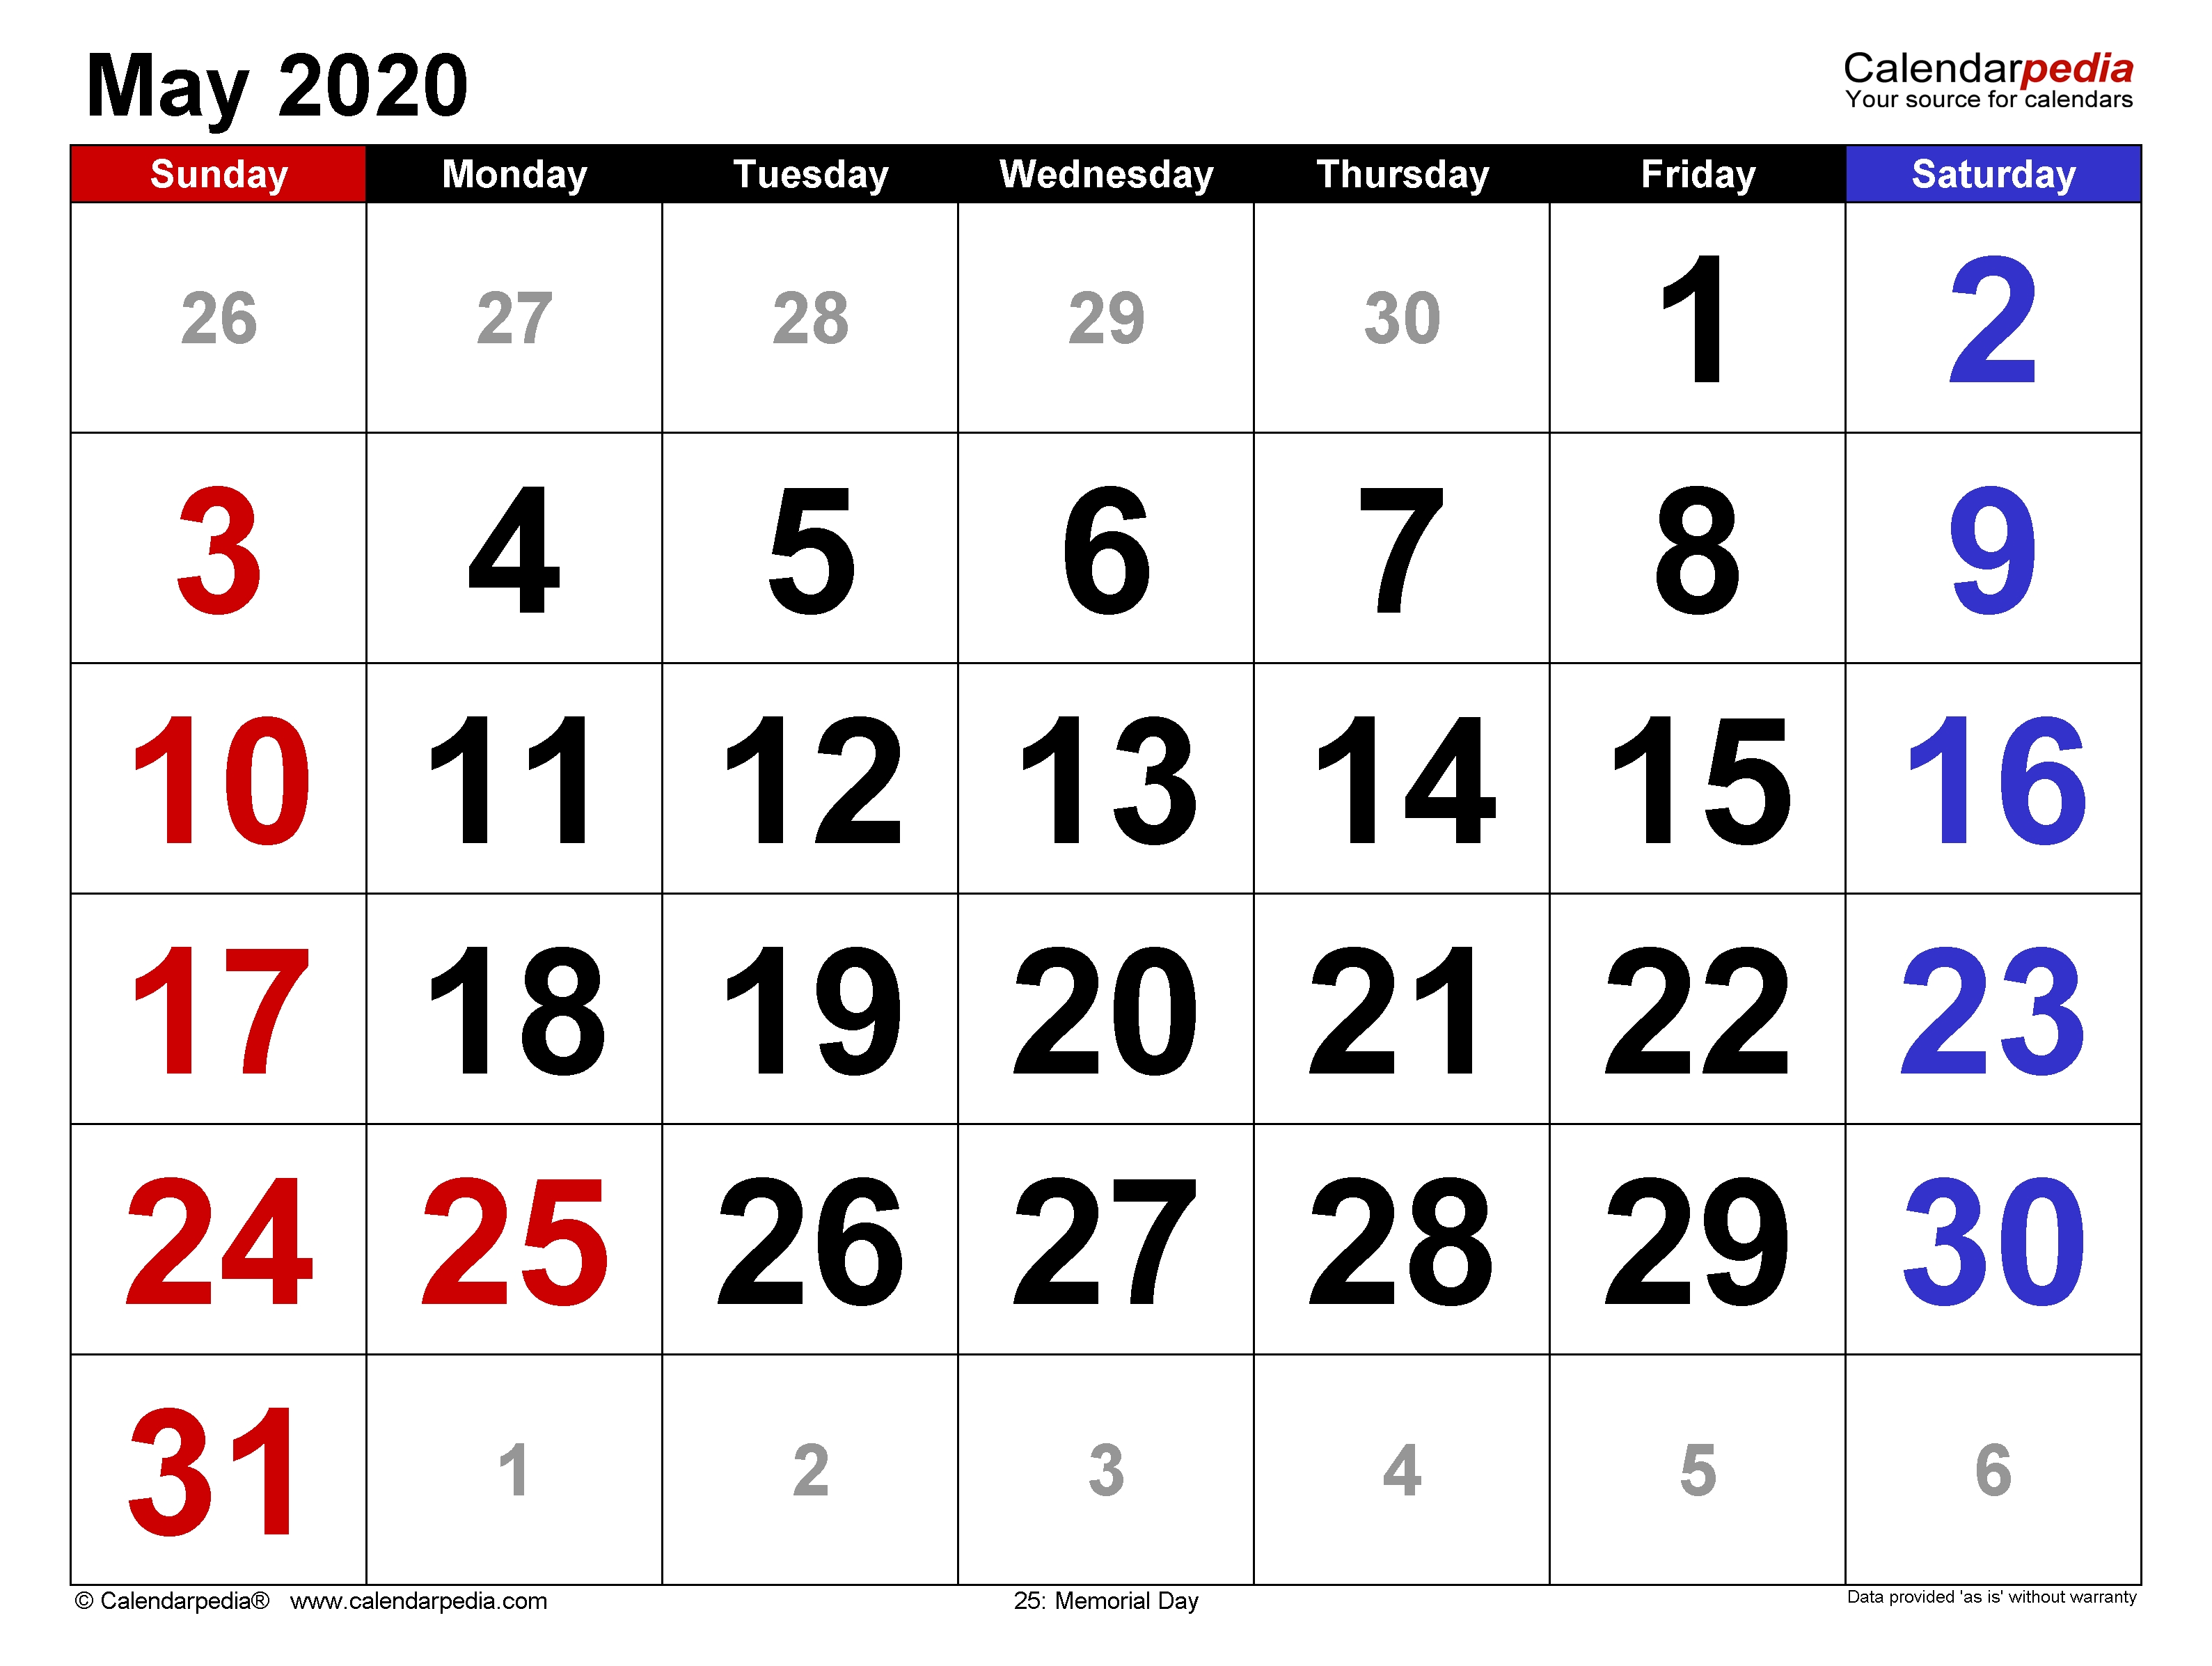 May 2020 - Calendar Templates For Word, Excel And Pdf